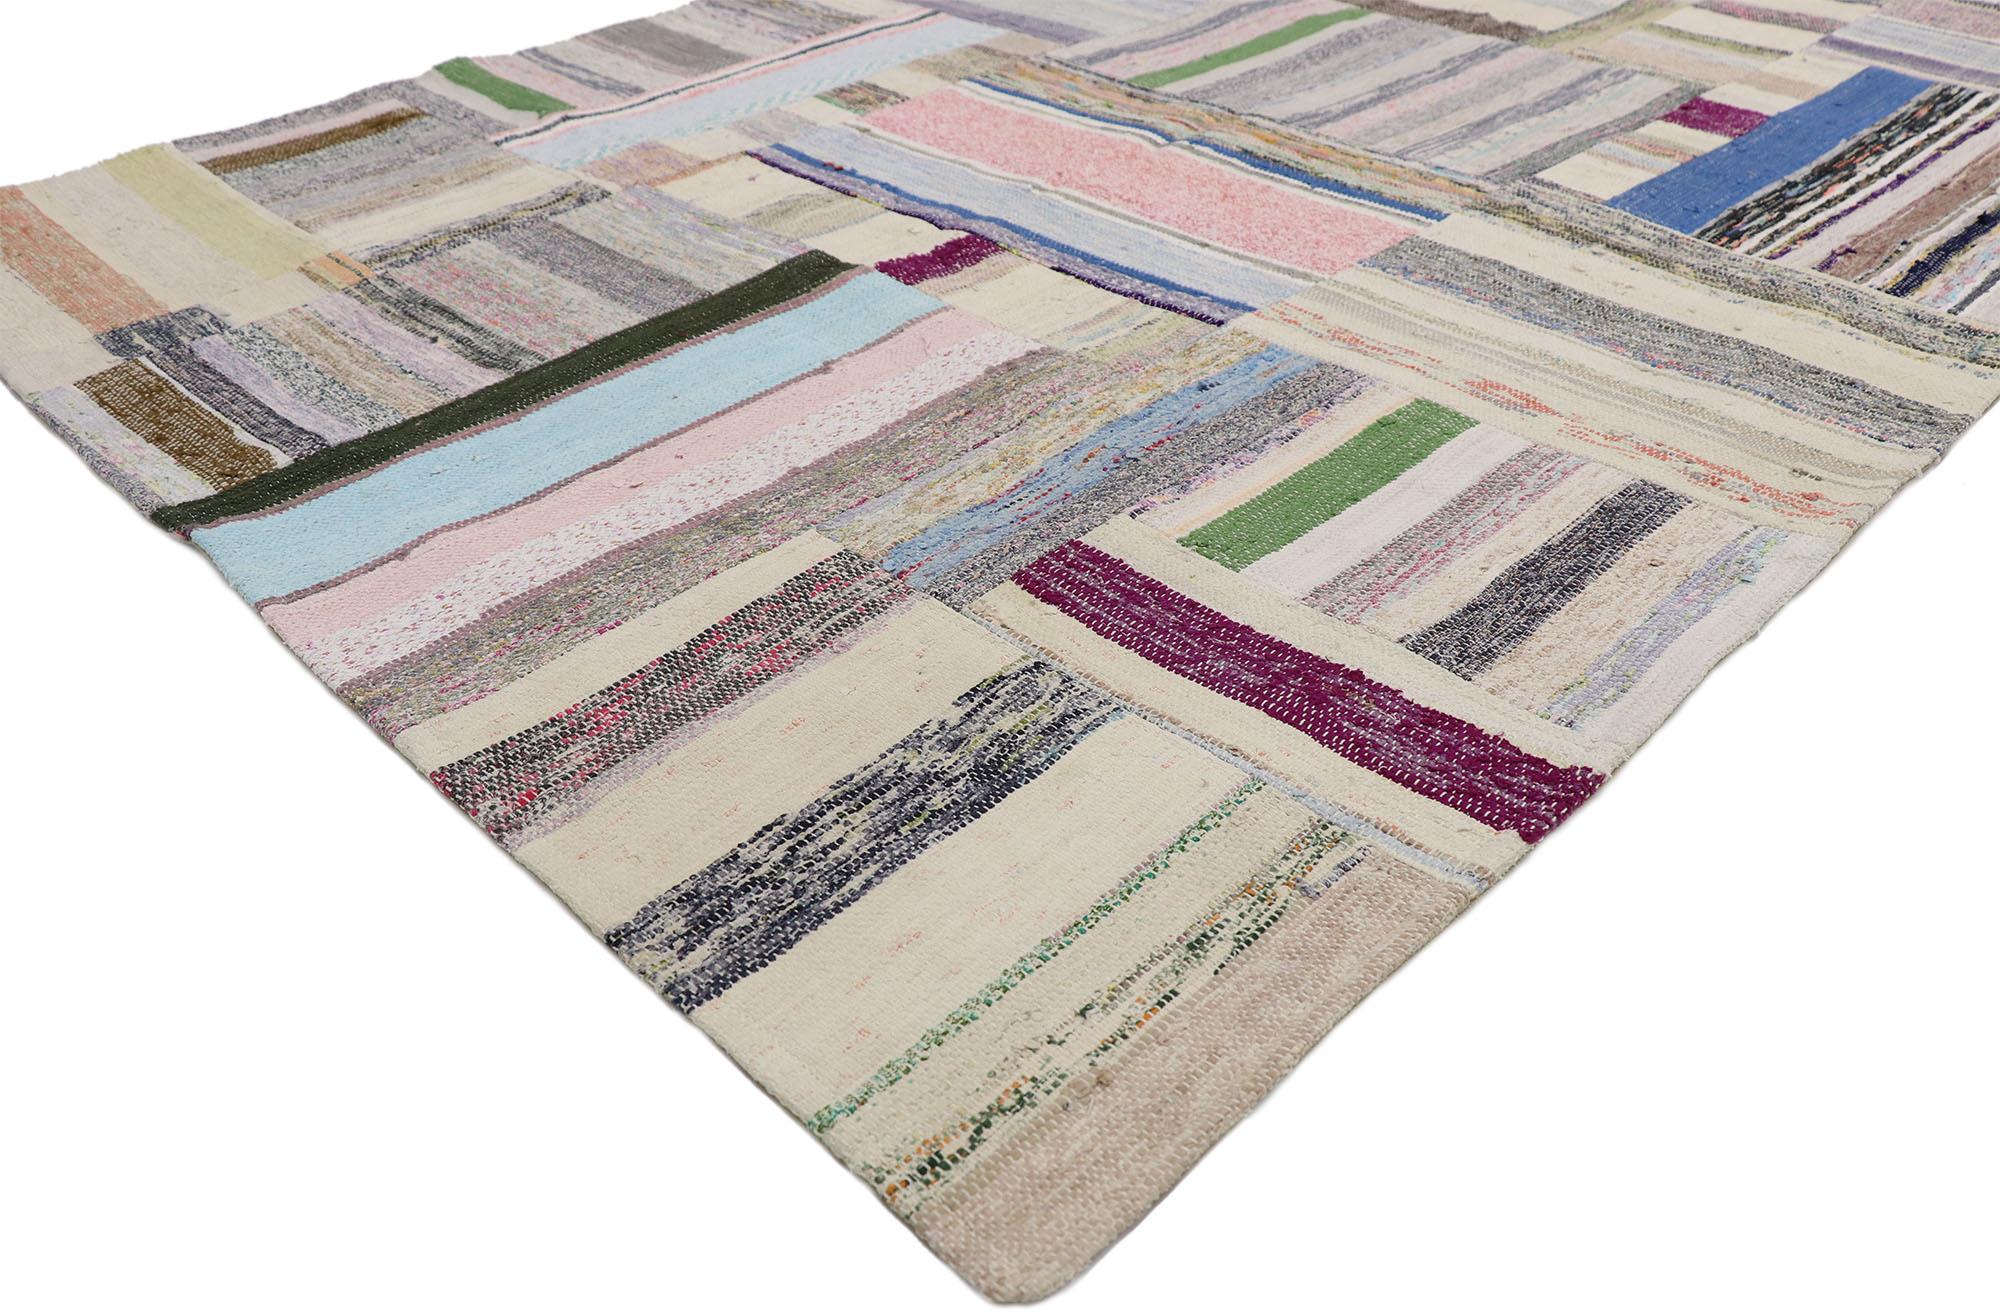 51585, Vintage Turkish Pala Patchwork Kilim Rug with Preppy Boho Chic Style 04'10 x 06'04. Mixing various patterns and colors create a stunning design in this Pala Patchwork Kilim rug. Featuring both wide and narrow bands in multiple colors, stripes